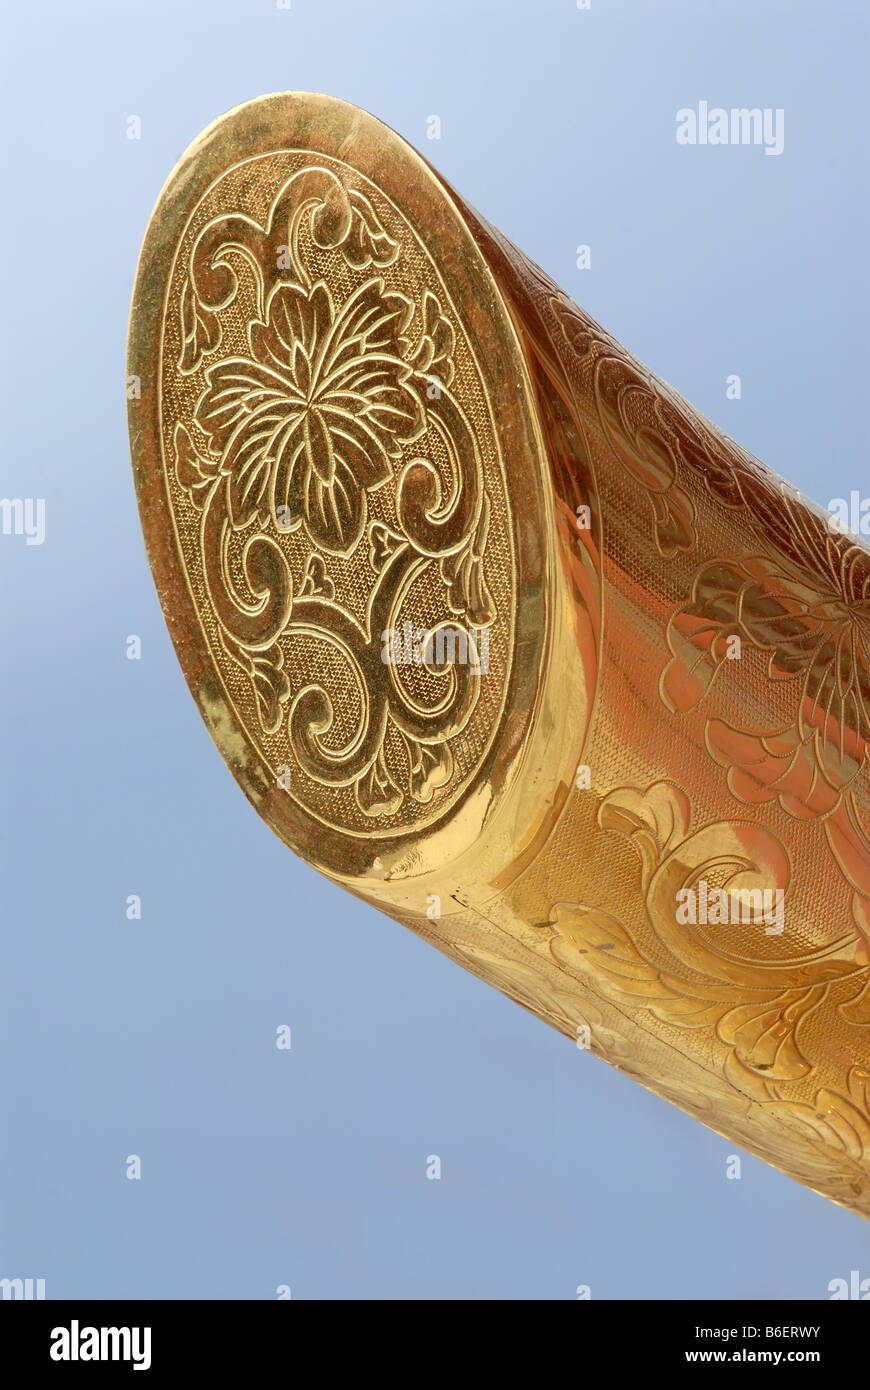 detail of a golden Japanese chrysanthemum ornament at the Heian Jingu Shrine in Kyoto, Japan Stock Photo